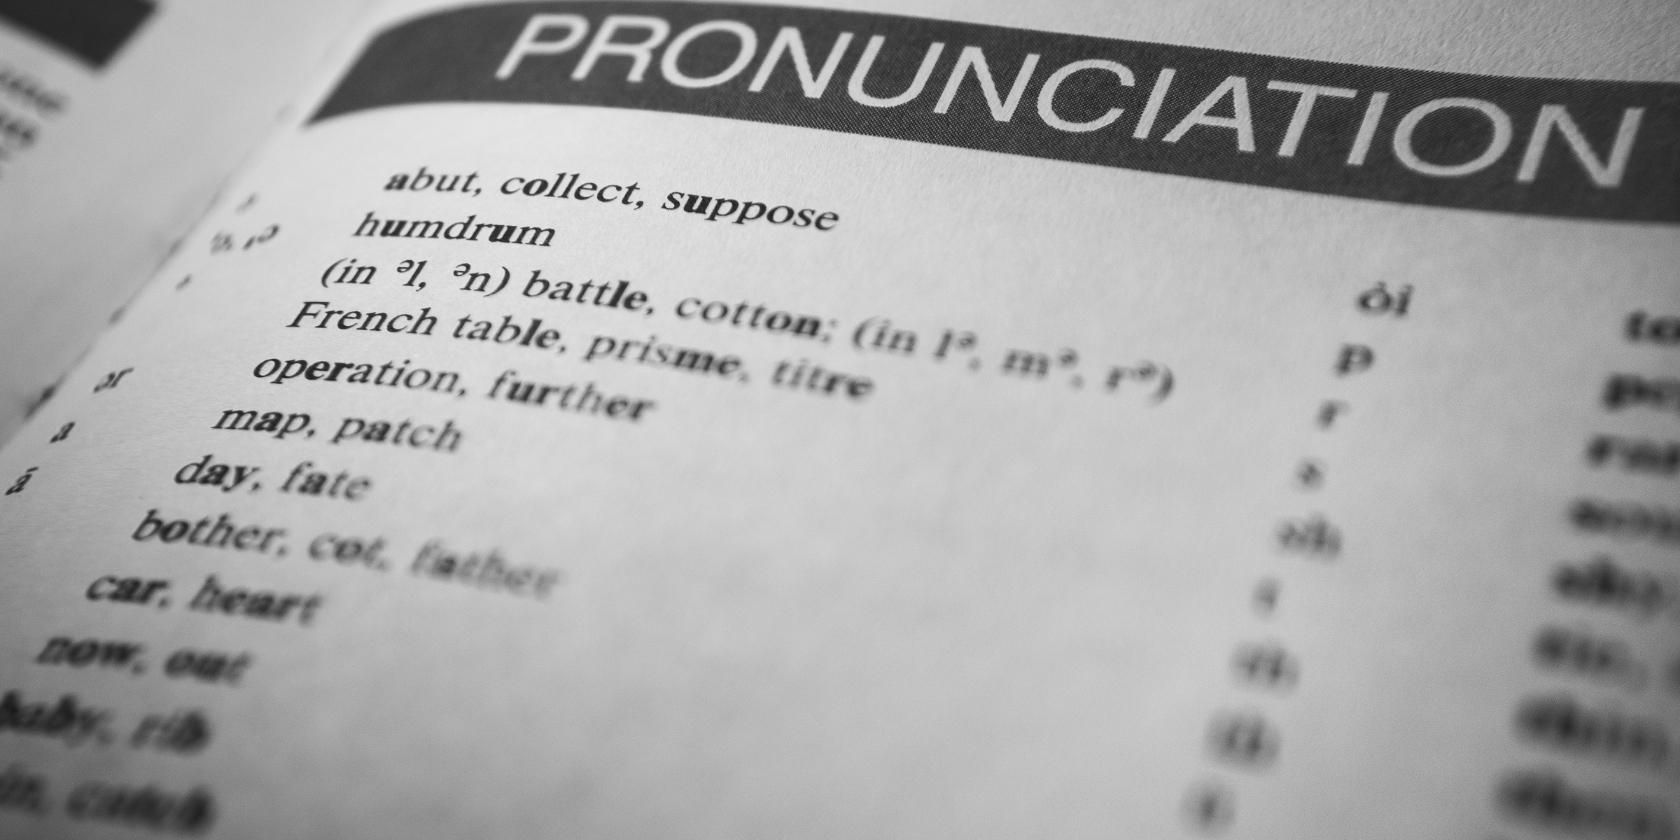 Photo of Pronunciation Page of Dictionary